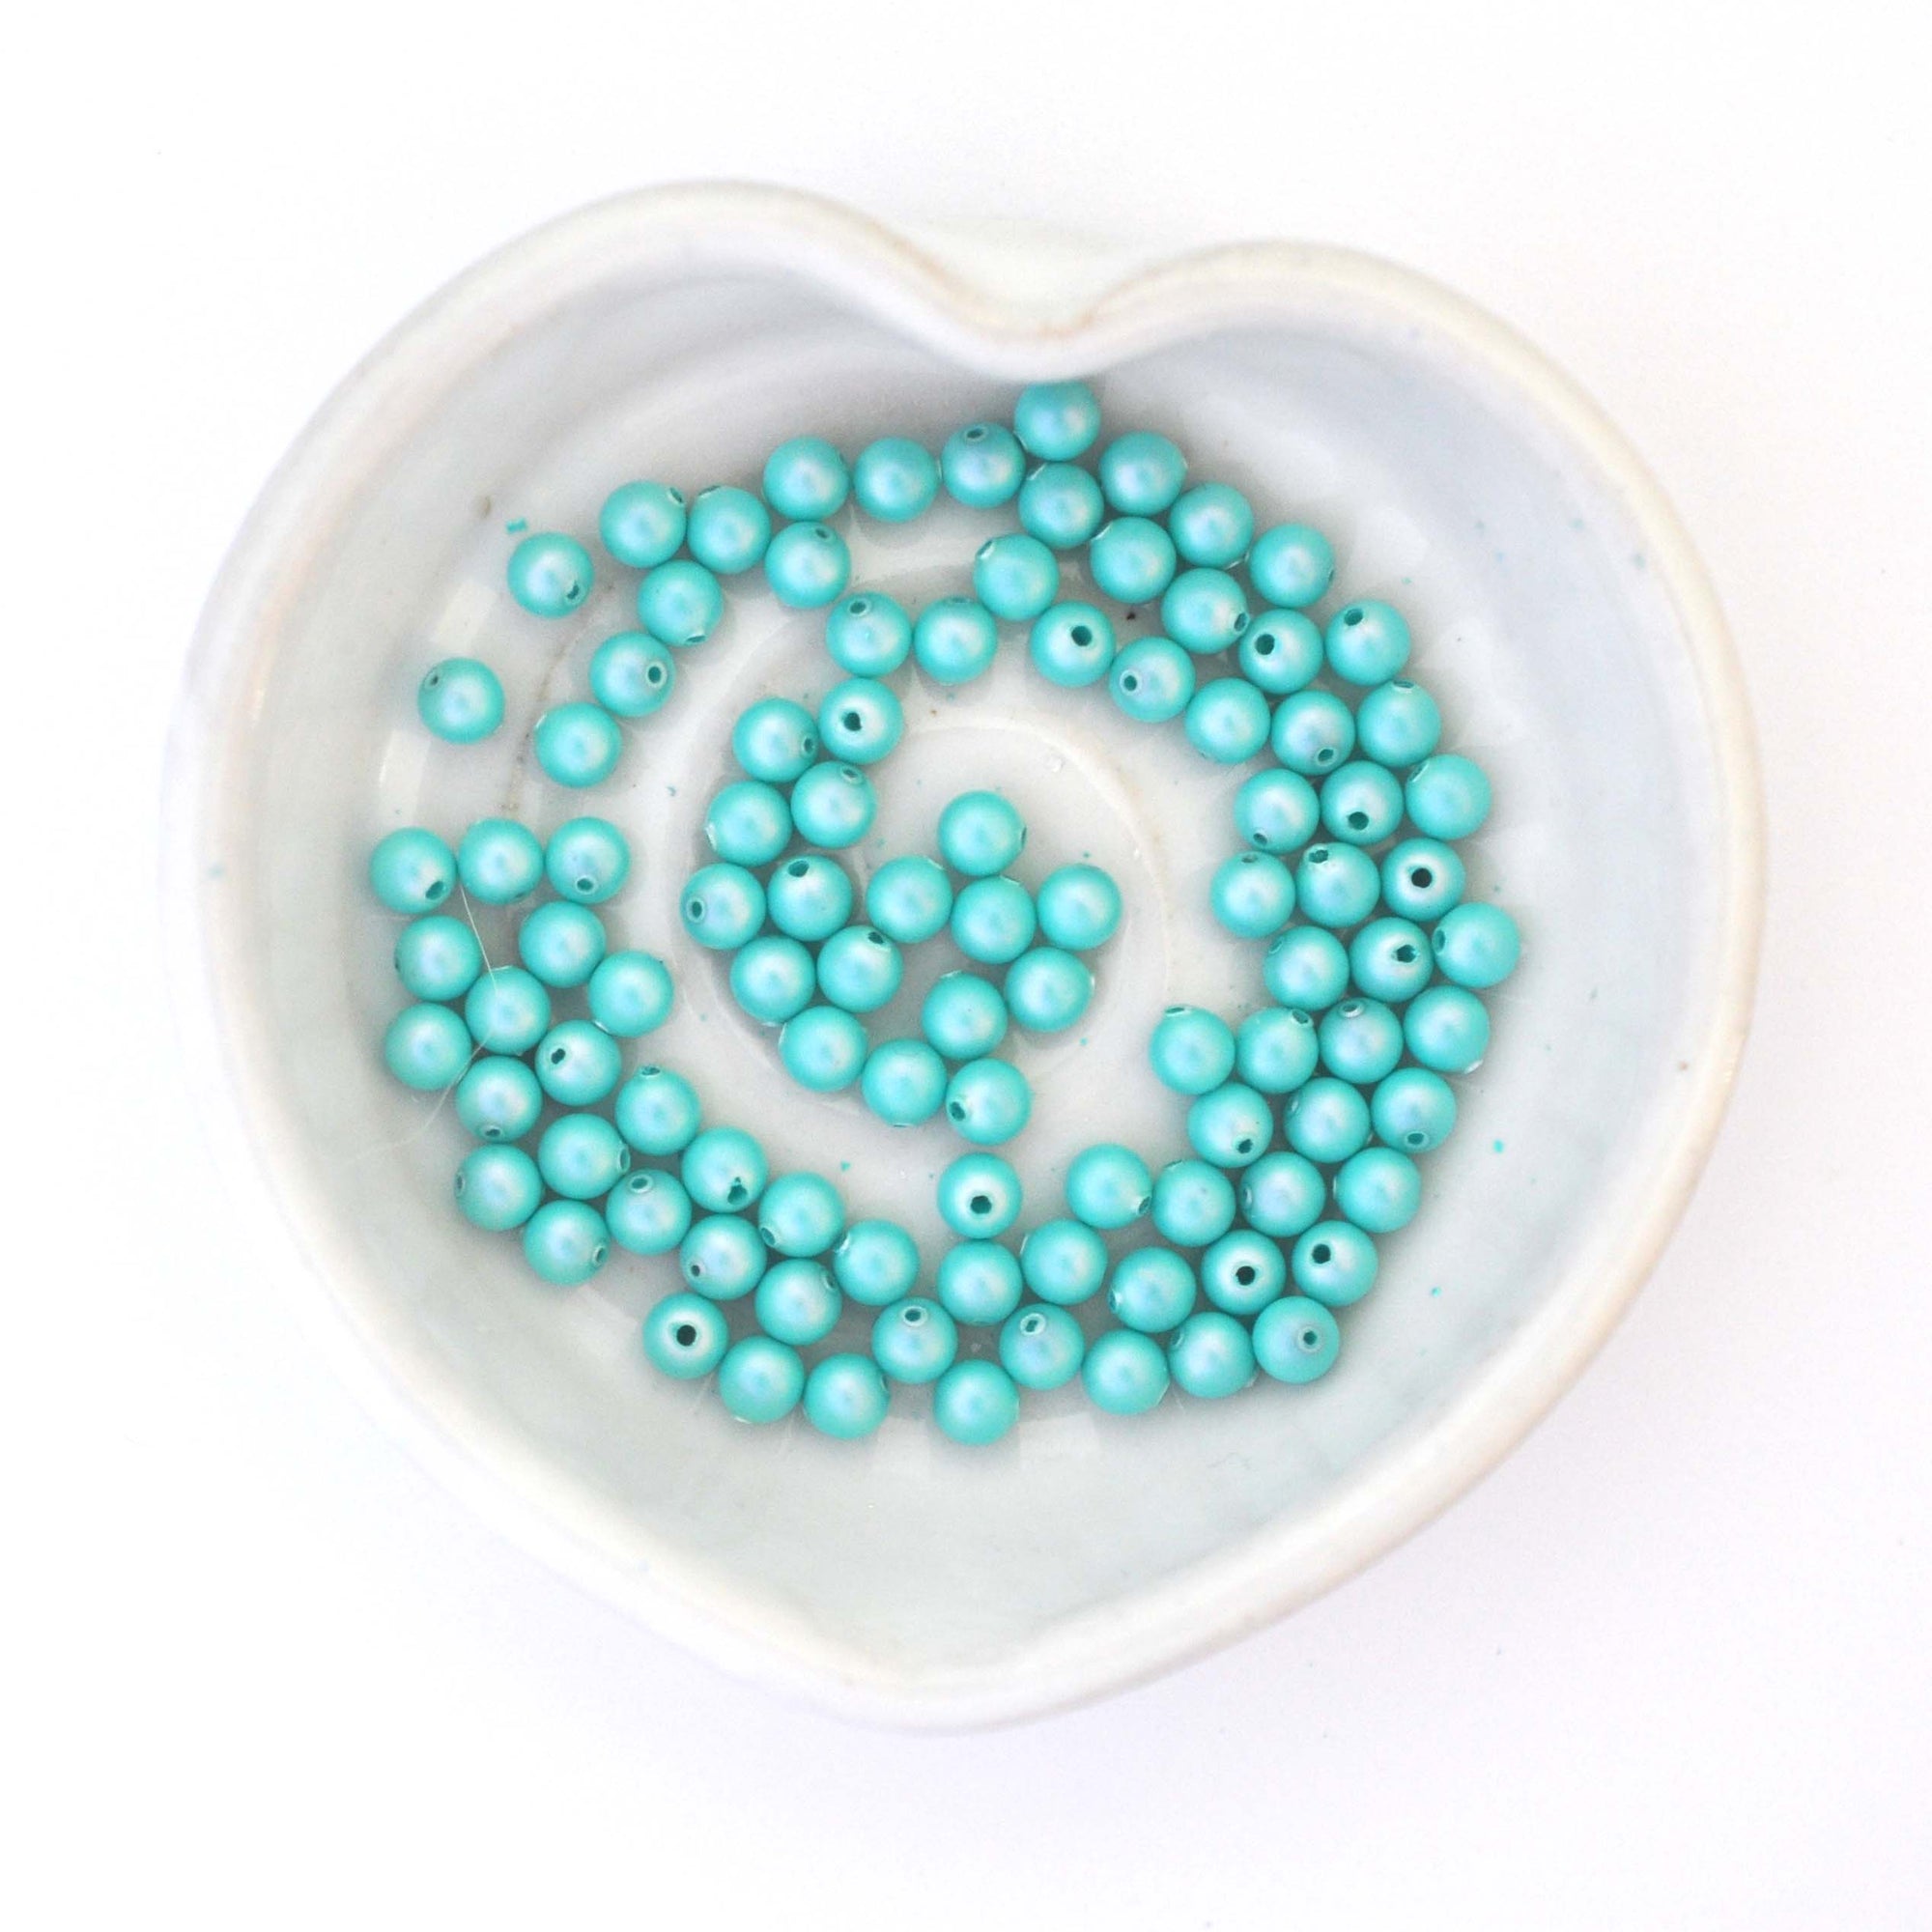 Iridescent Light Turquoise 5810 Barton Crystal Round Pearl Beads 4mm